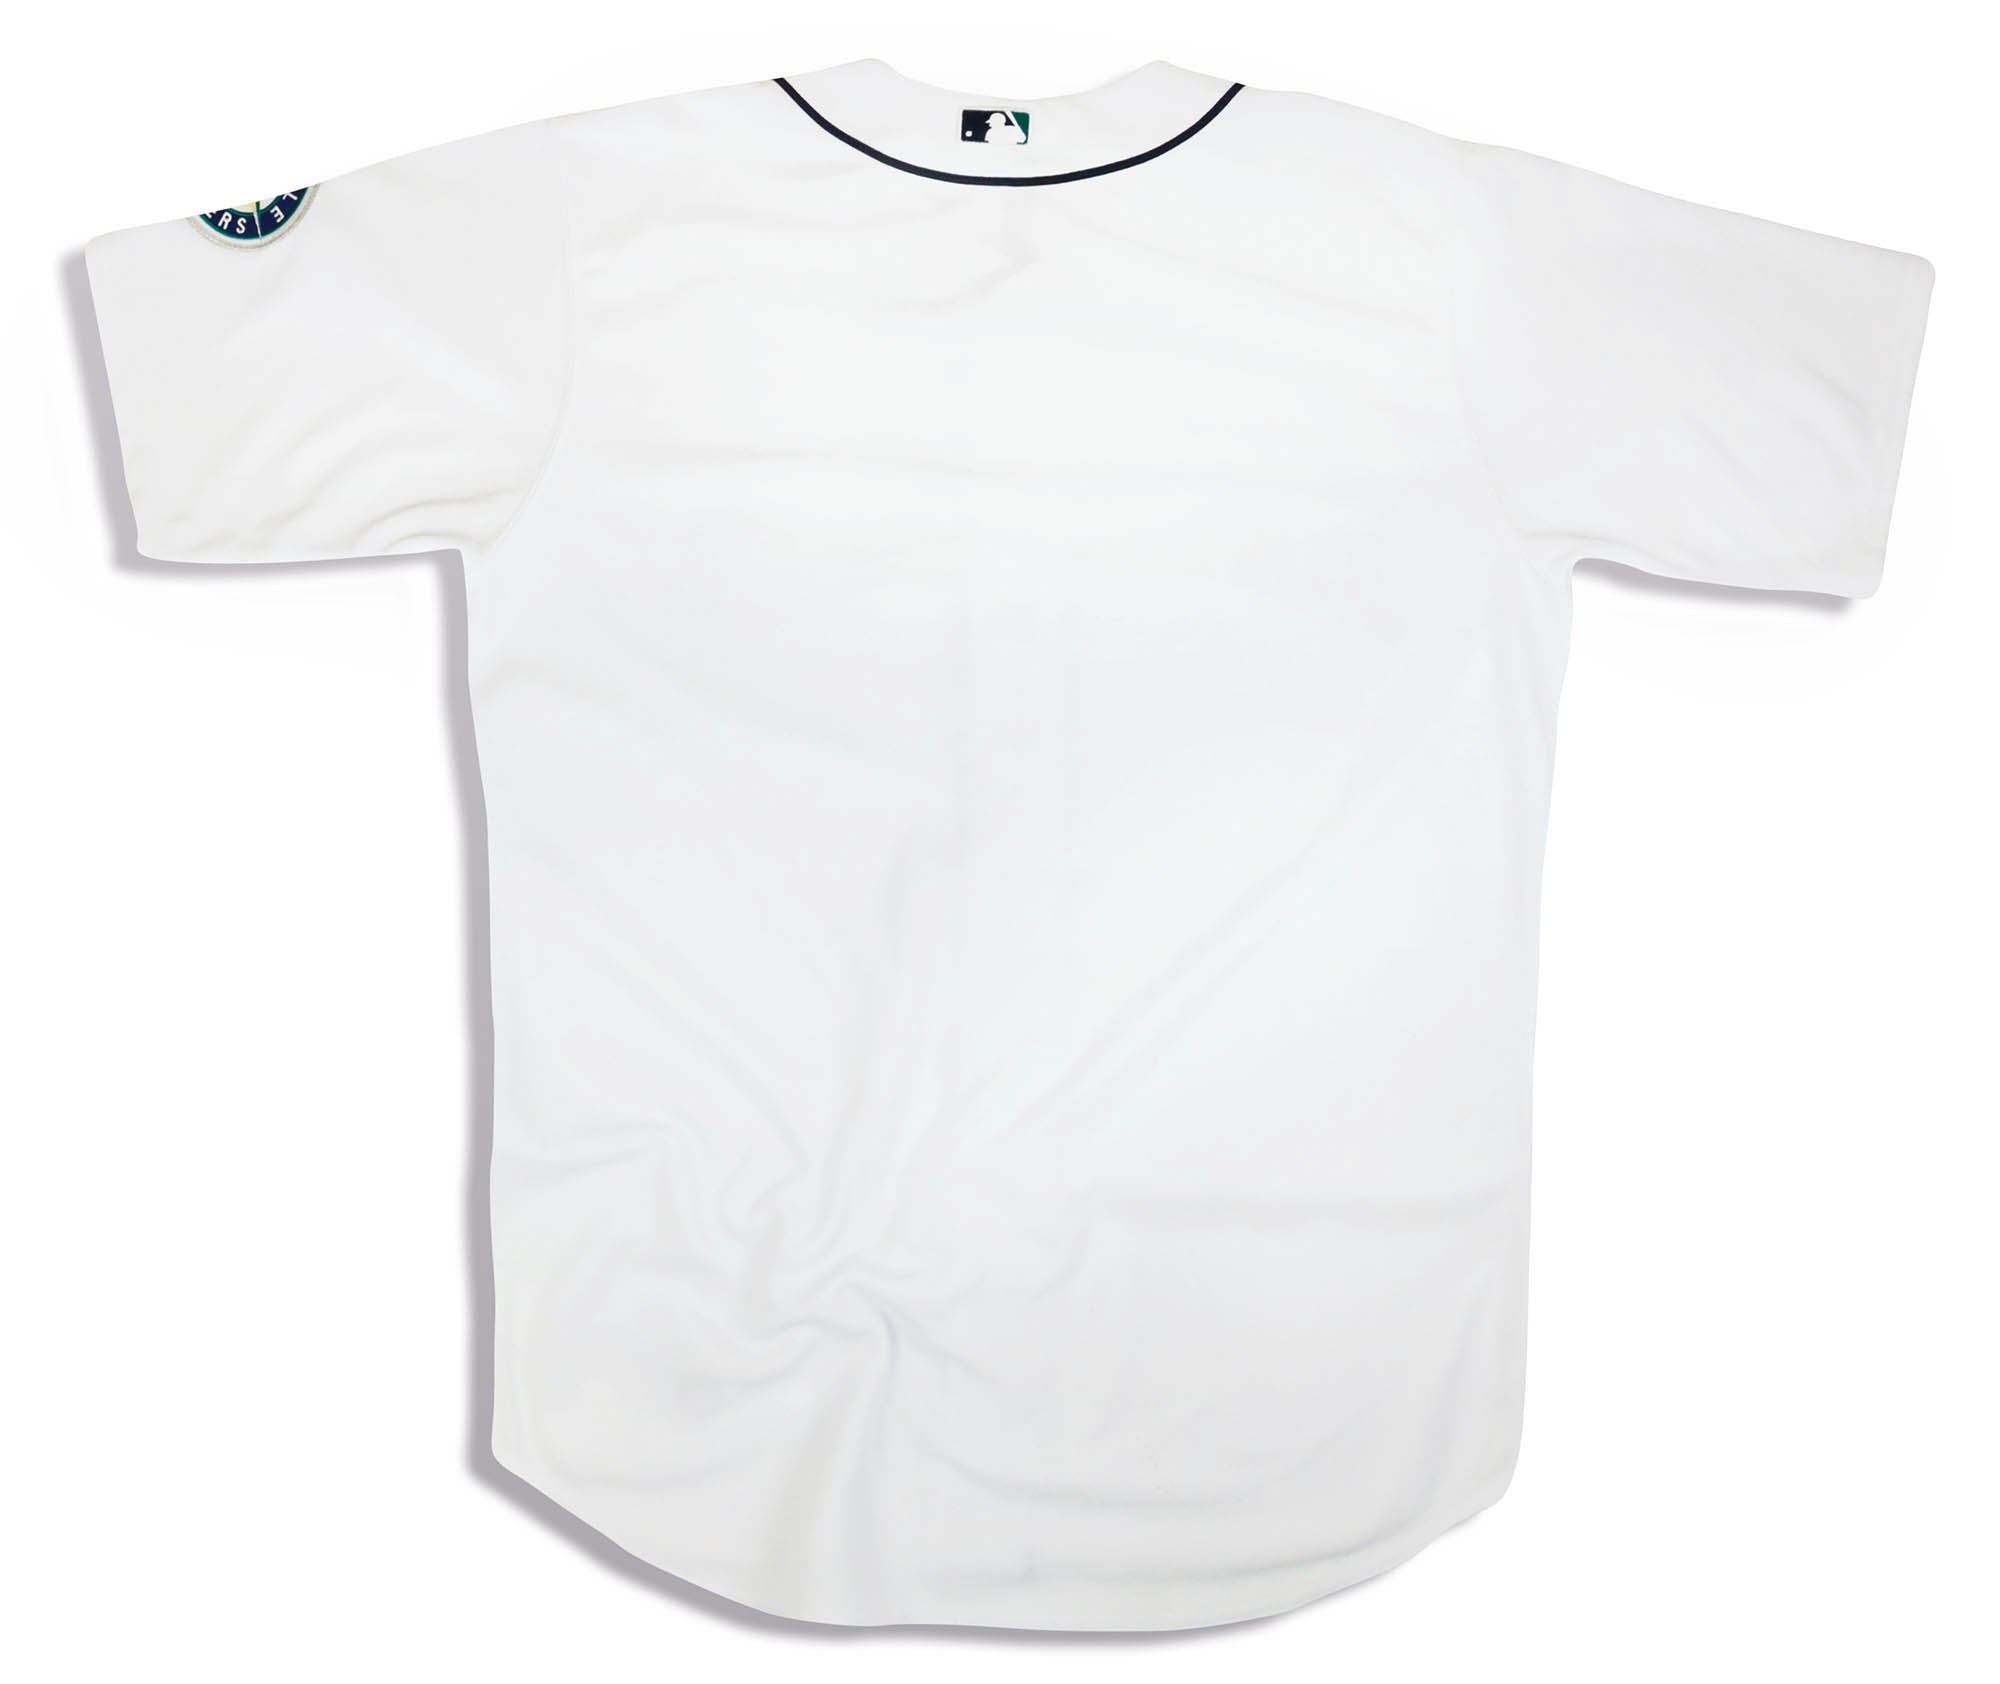 2010 SEATTLE MARINERS AUTHENTIC MAJESTIC JERSEY (HOME) XXL